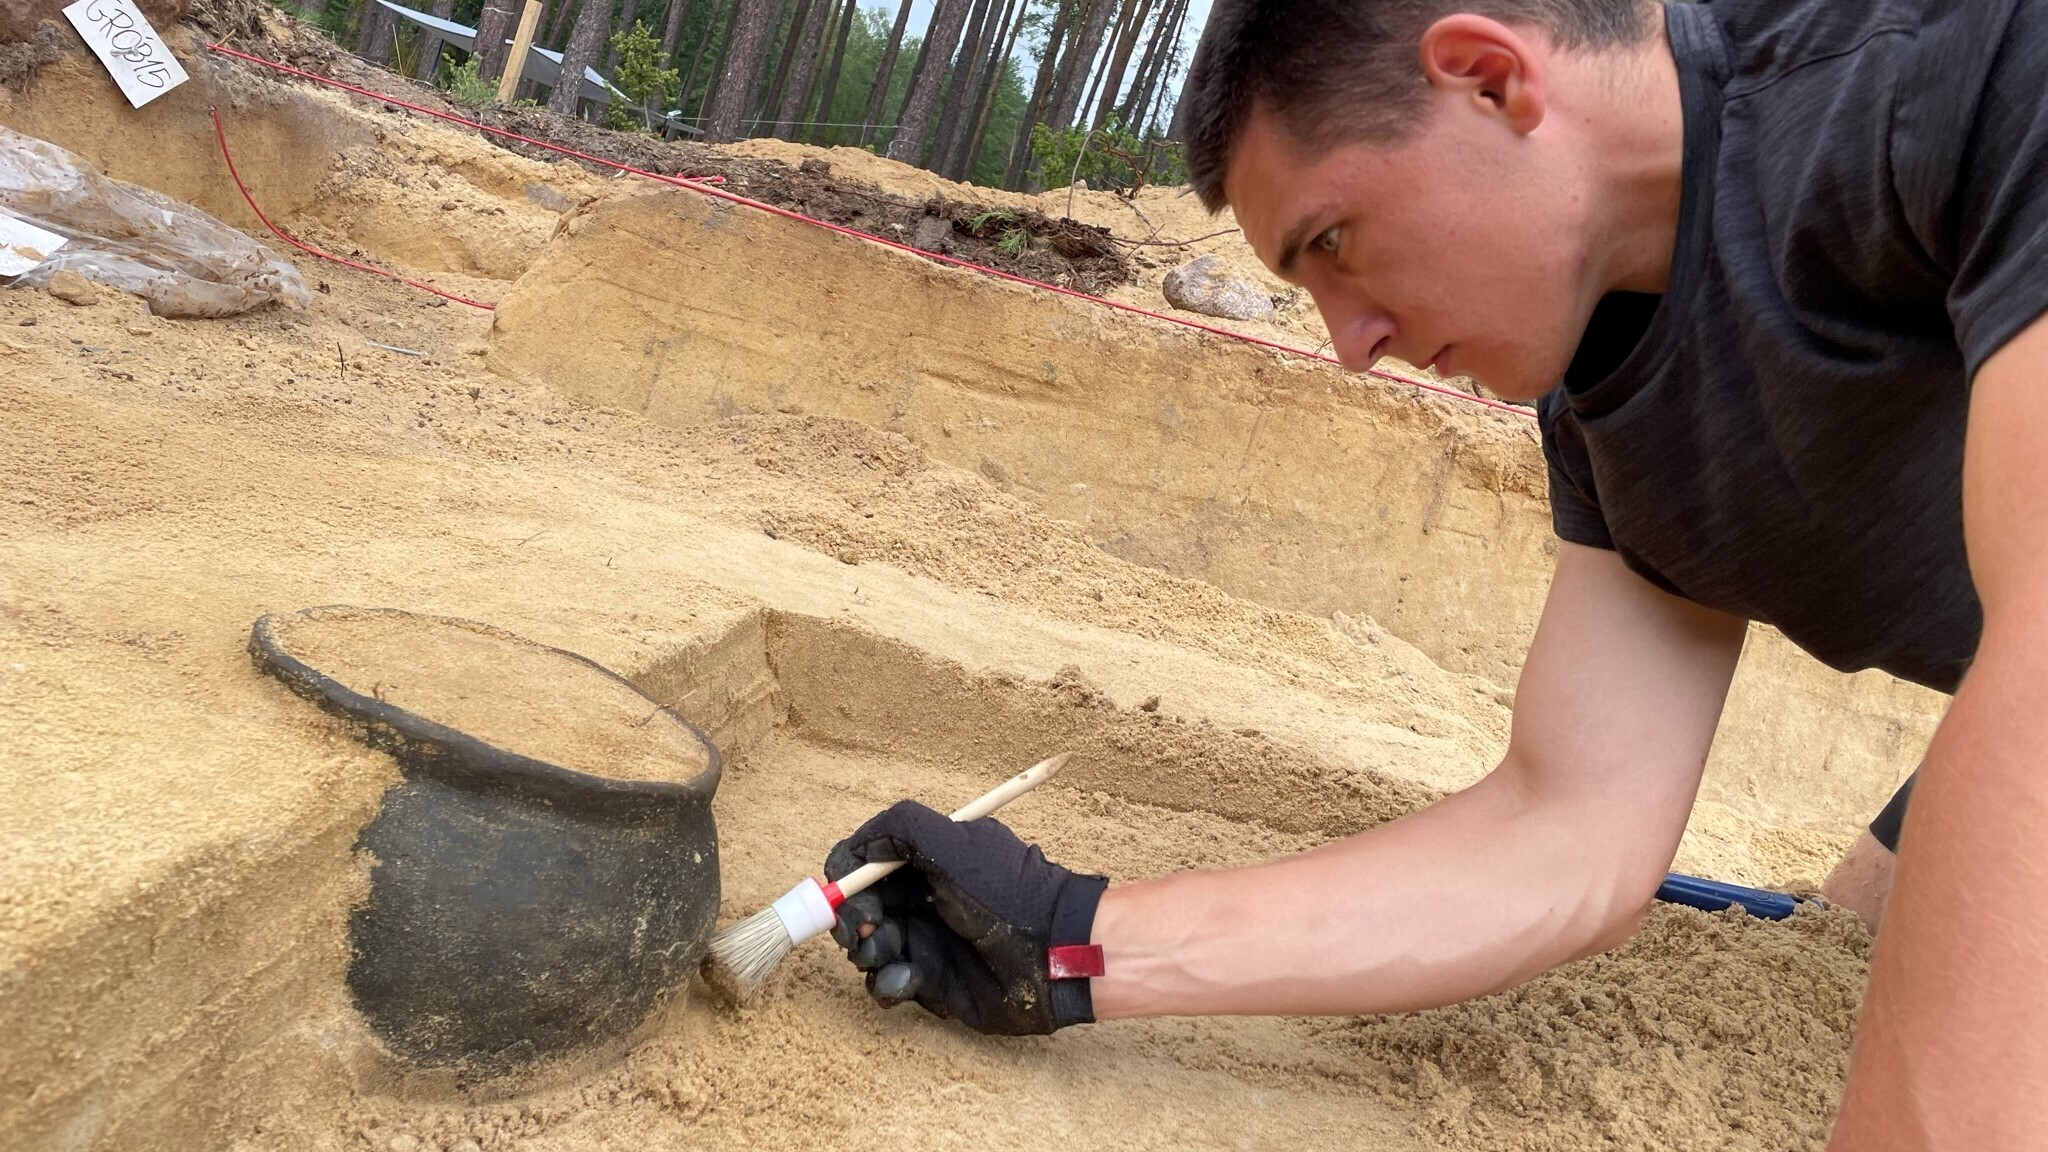 A researcher excavates a black cremation urn in a dirt-filled excavation space.